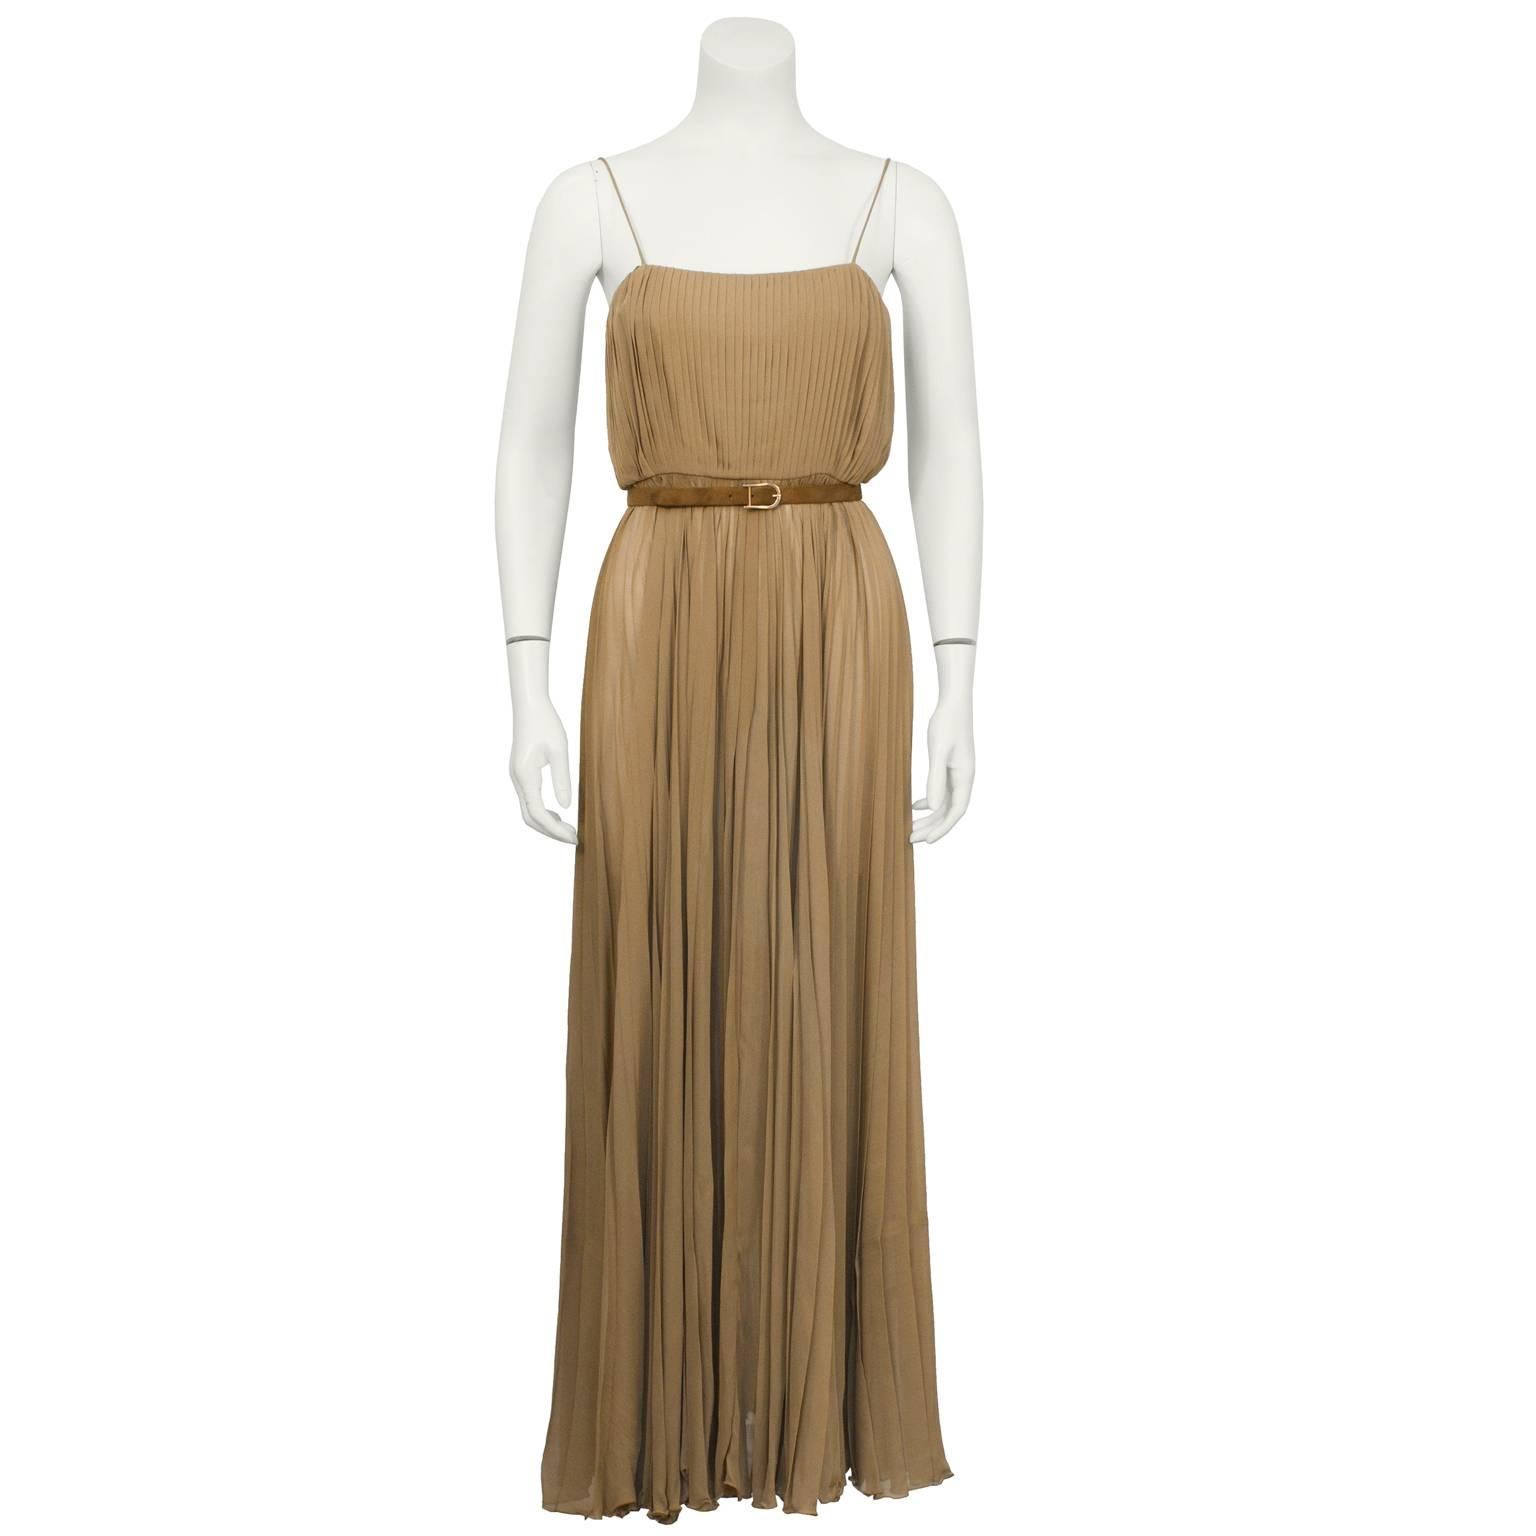 Bill Blass (label missing) 1970's pleated mocha chiffon evening gown. The gown has spaghetti straps and an unlined skirt. Zips up the back and has a matching skinny mocha suede belt with gold buckle to be worn at the empire waist. In excellent